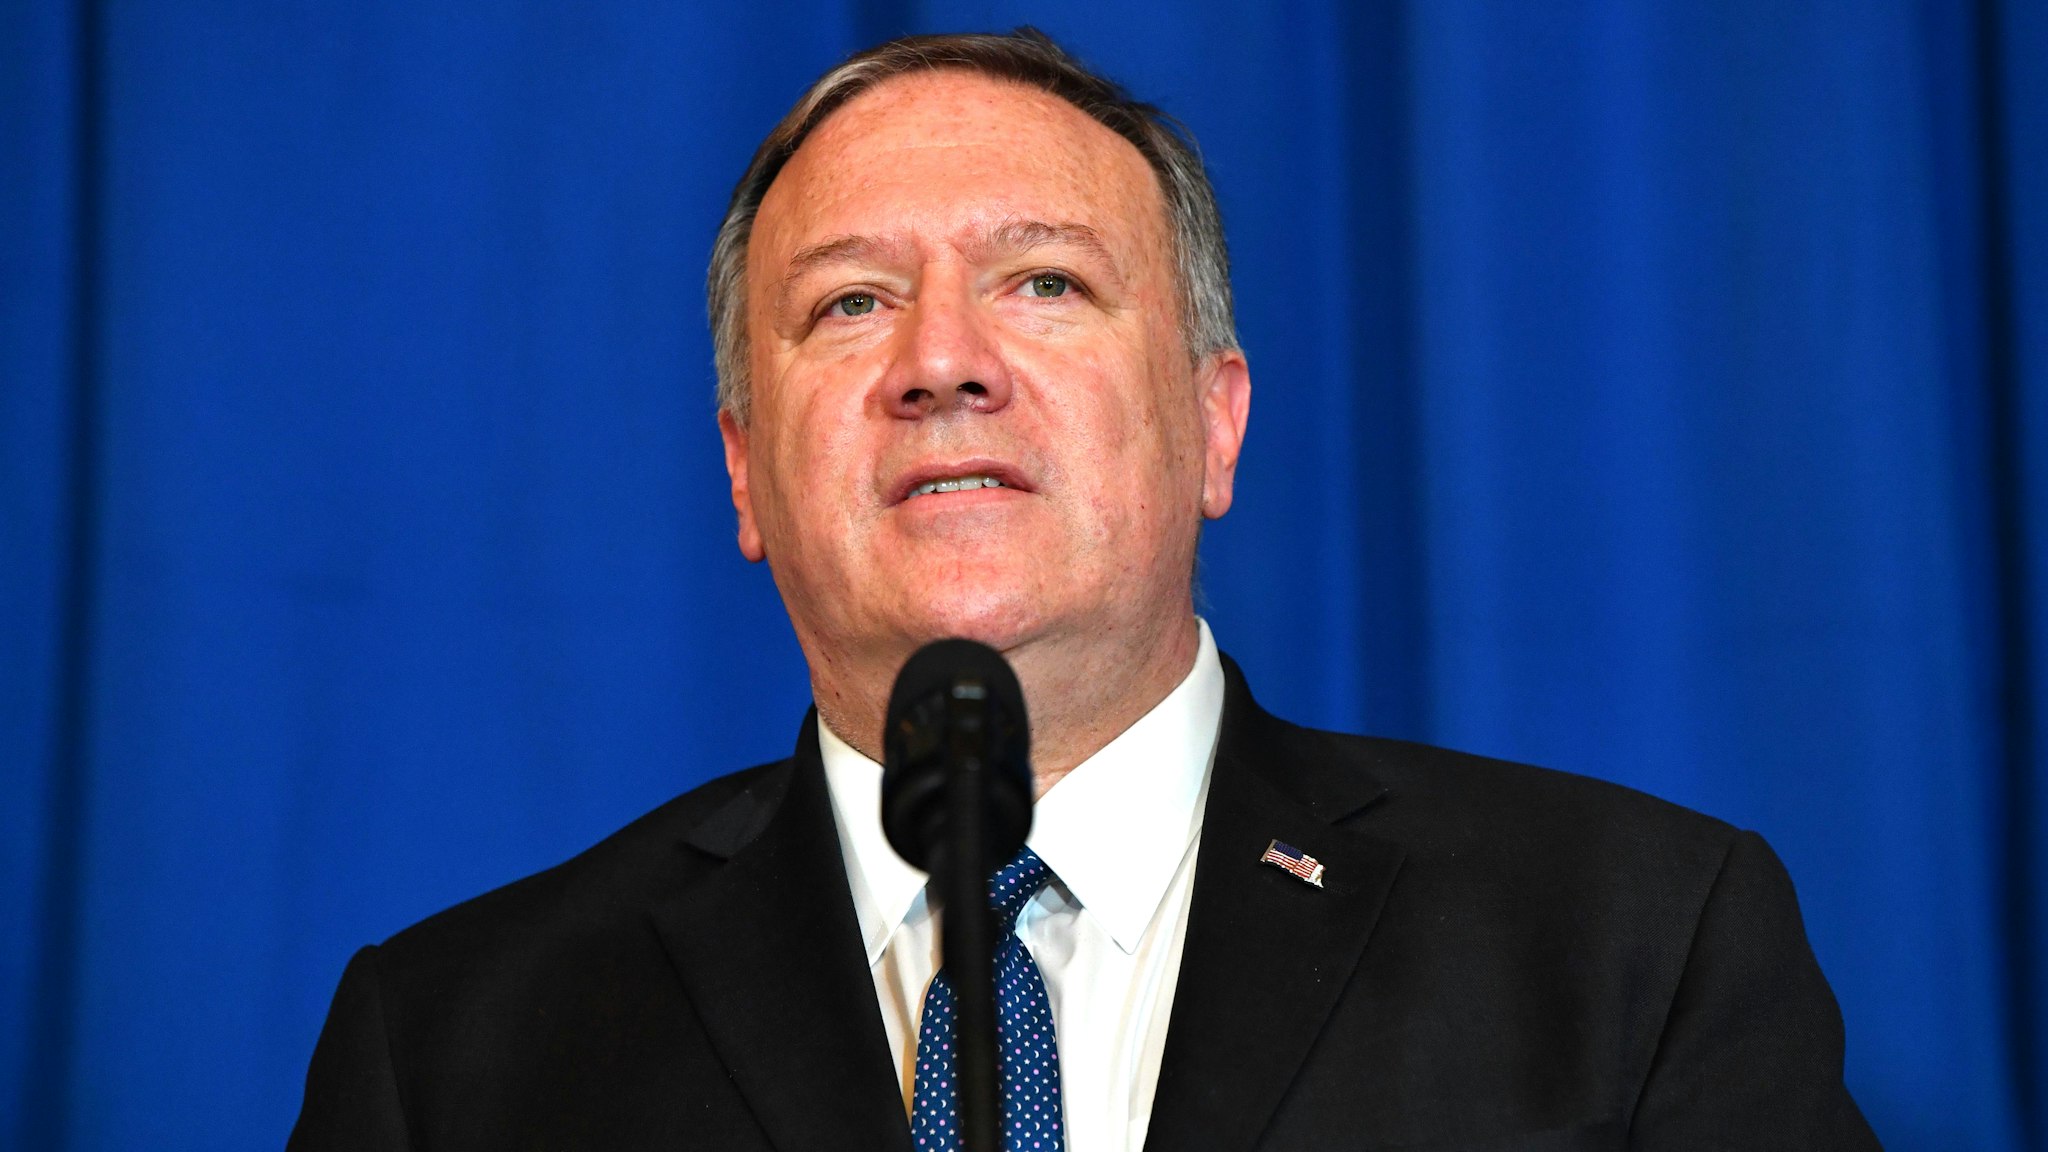 US Secretary of State Mike Pompeo speaks onstage during a briefing on the past 72 hours events in Mar a Lago, Palm Beach, Florida on December 29, 2019. - Pompeo says they came to brief POTUS on events of past 72 hours Pompeo: We will not stand for the Islamic Republic of Iran to take actions that put American men and women in jeopardy.